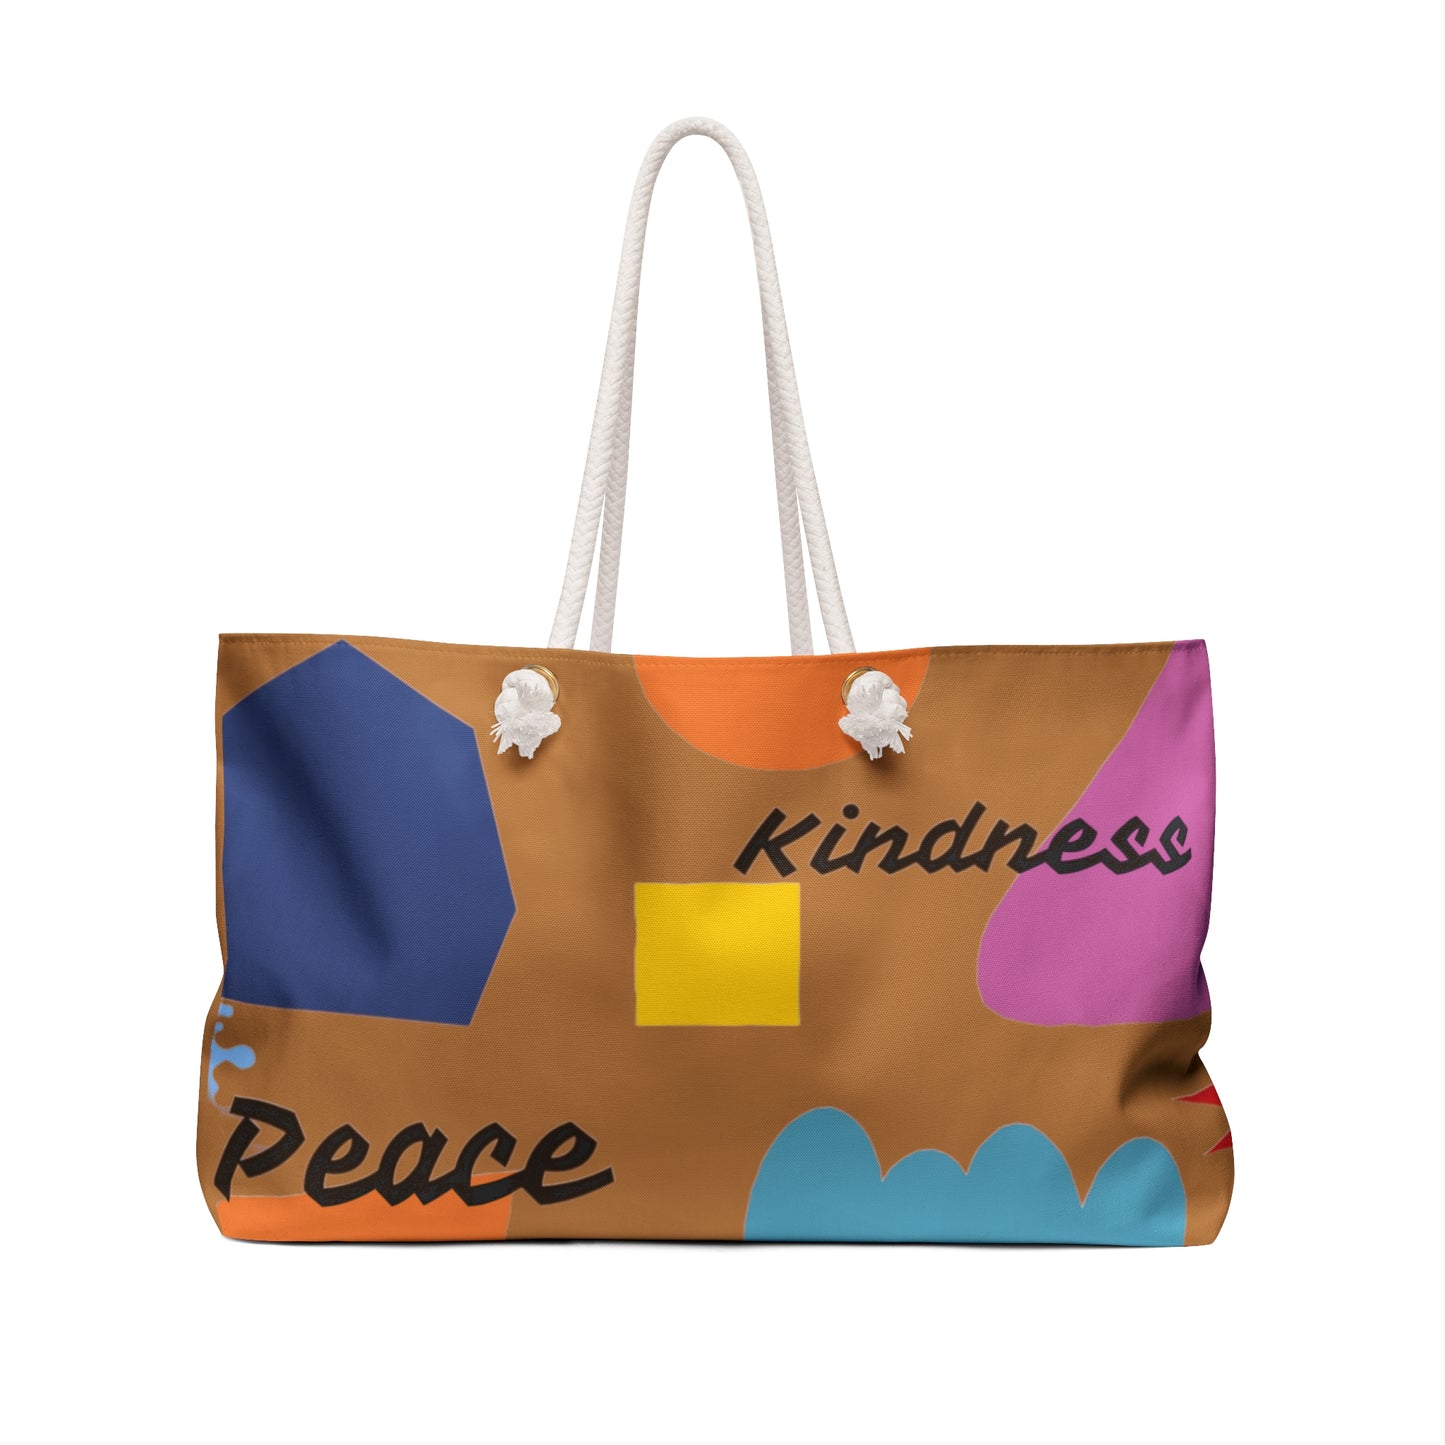 Travel in Style and Purpose: Vibrant Light Brown Weekender Bag with Inspirational Message